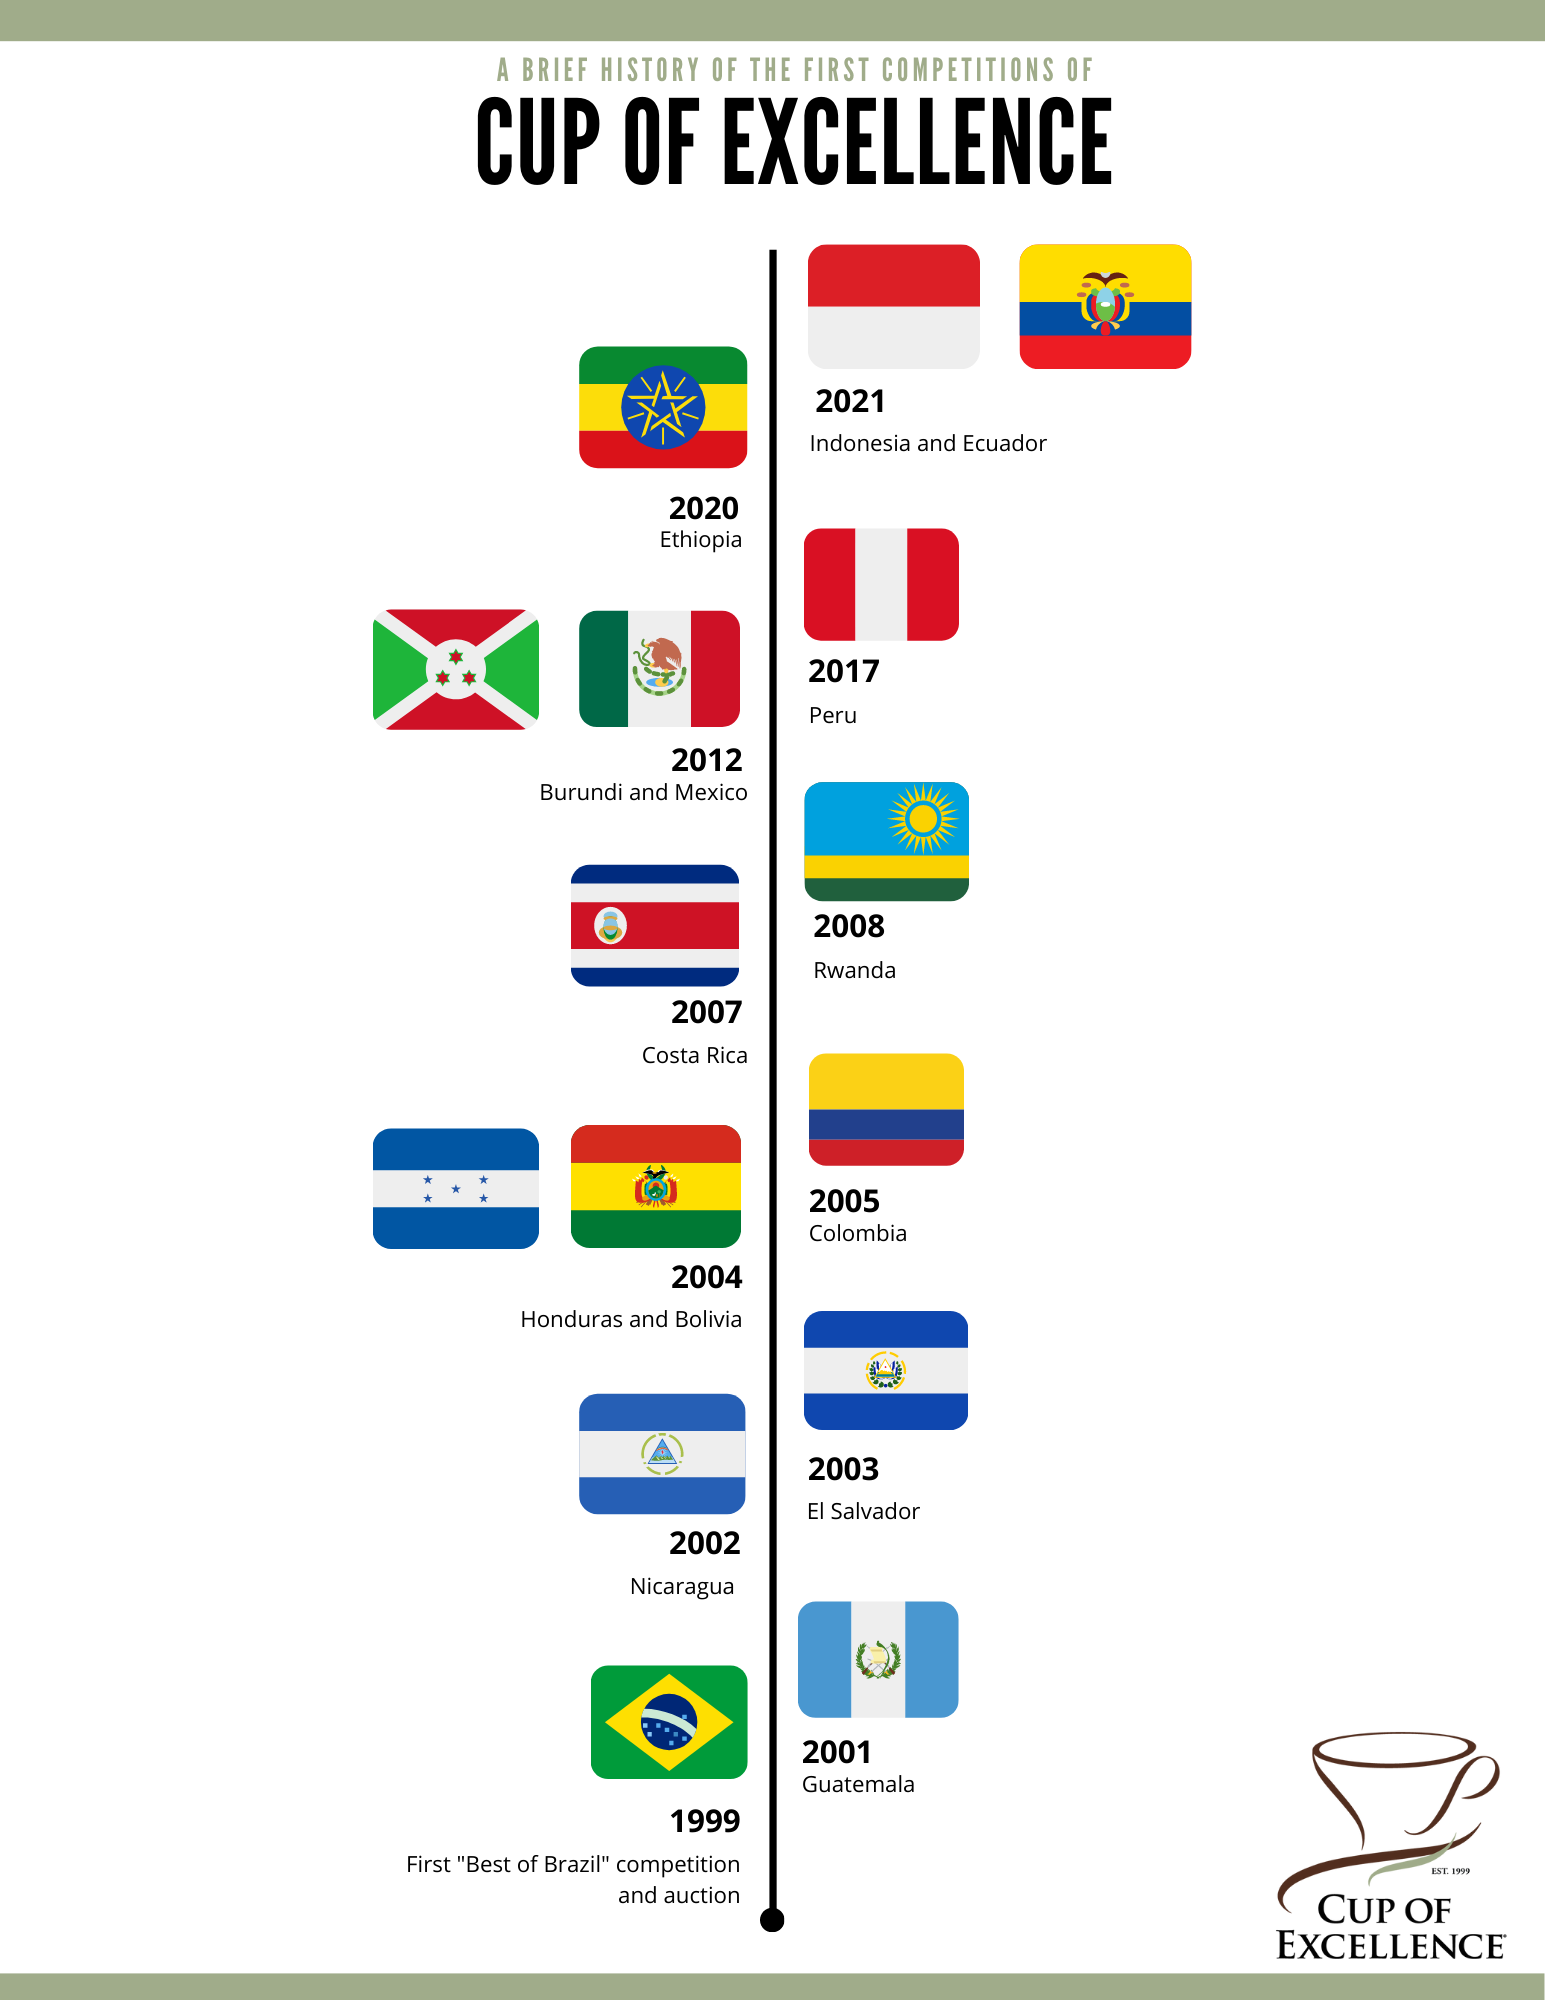 https://cupofexcellence.org/wp-content/uploads/2022/04/copy-of-coe-timeline.png